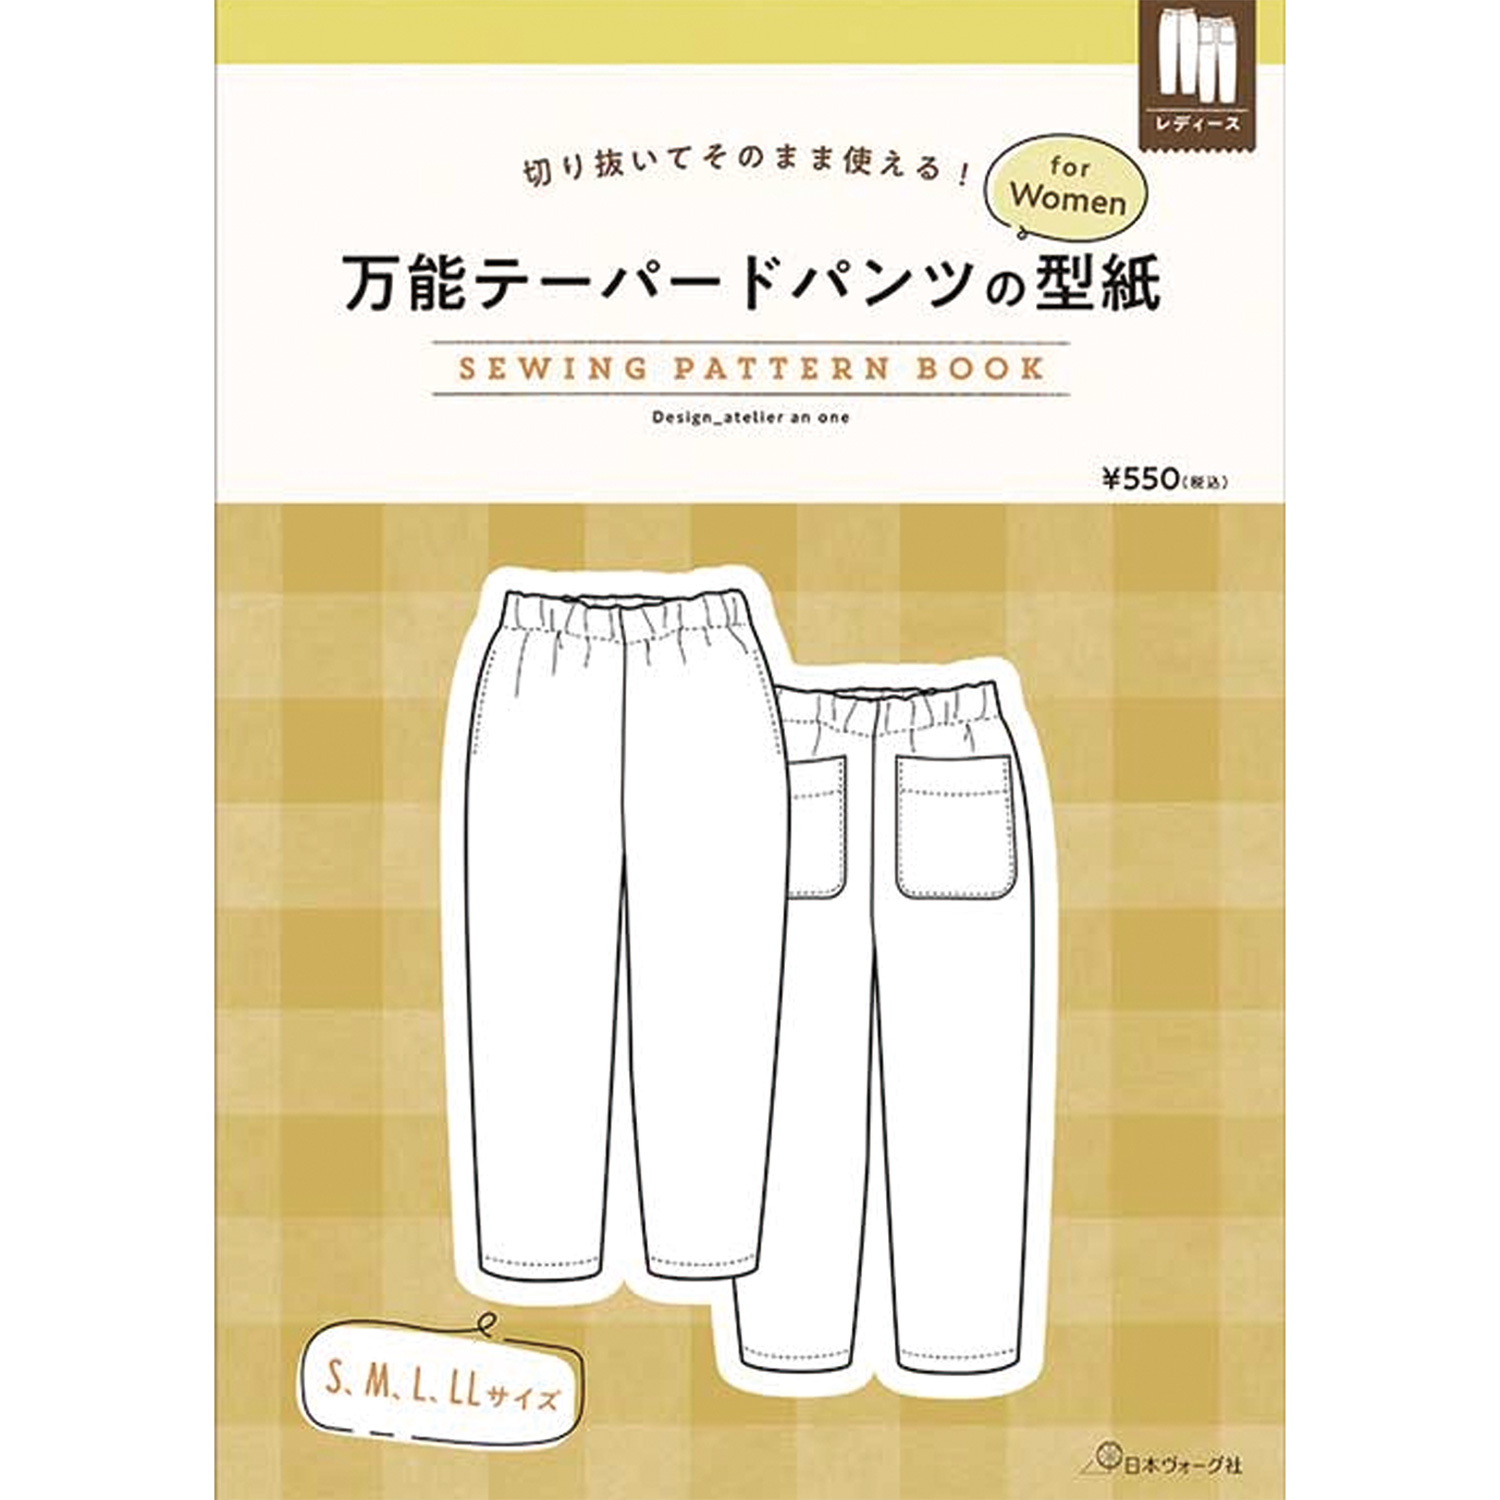 NV22071 Versatile tapered pants pattern for Women (book)